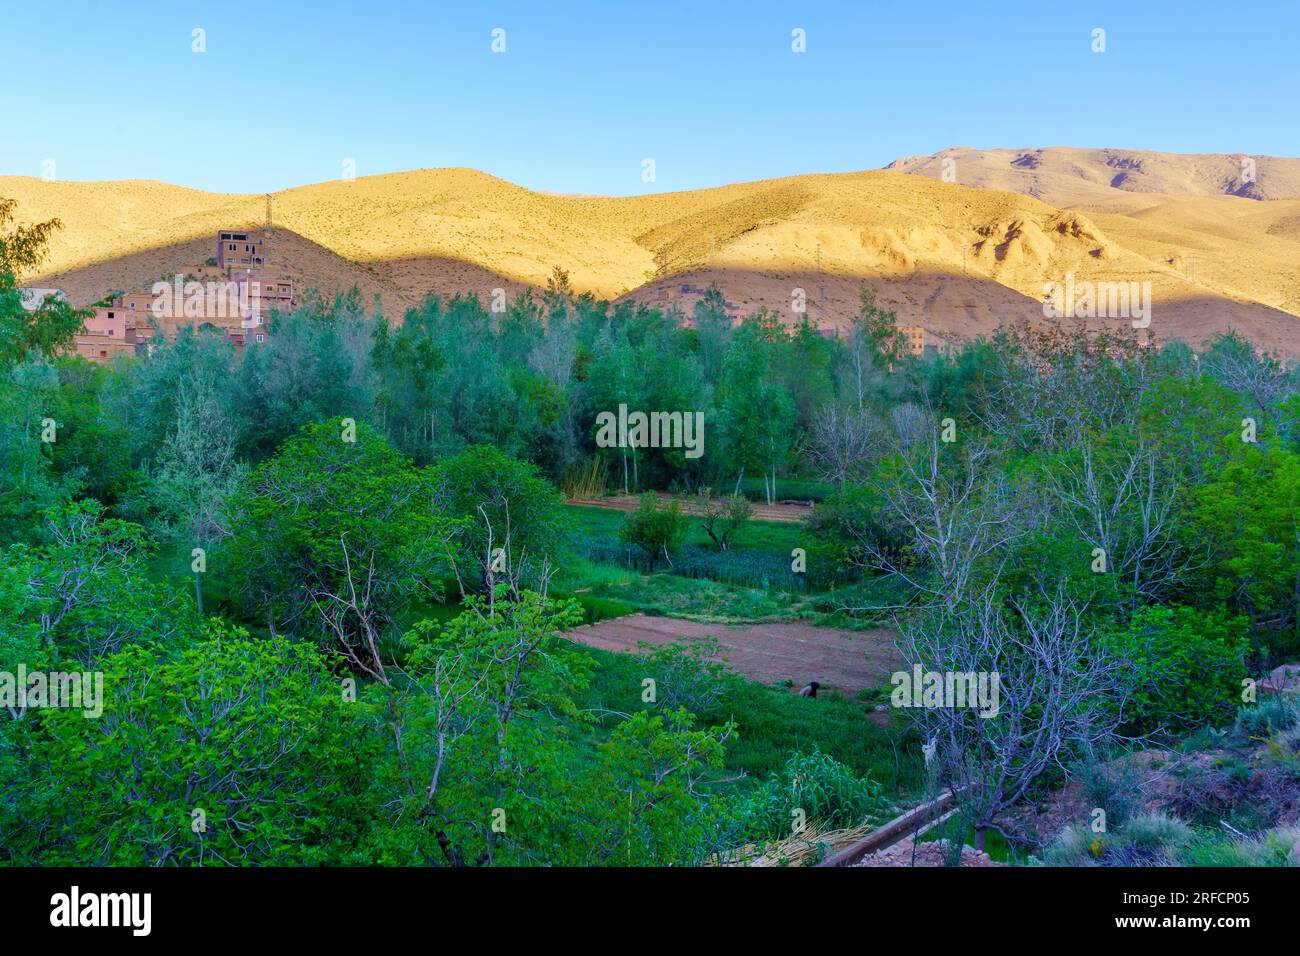 View of the Dades Gorge landscape, in the High Atlas Mountains, Central Morocco Stock Photo